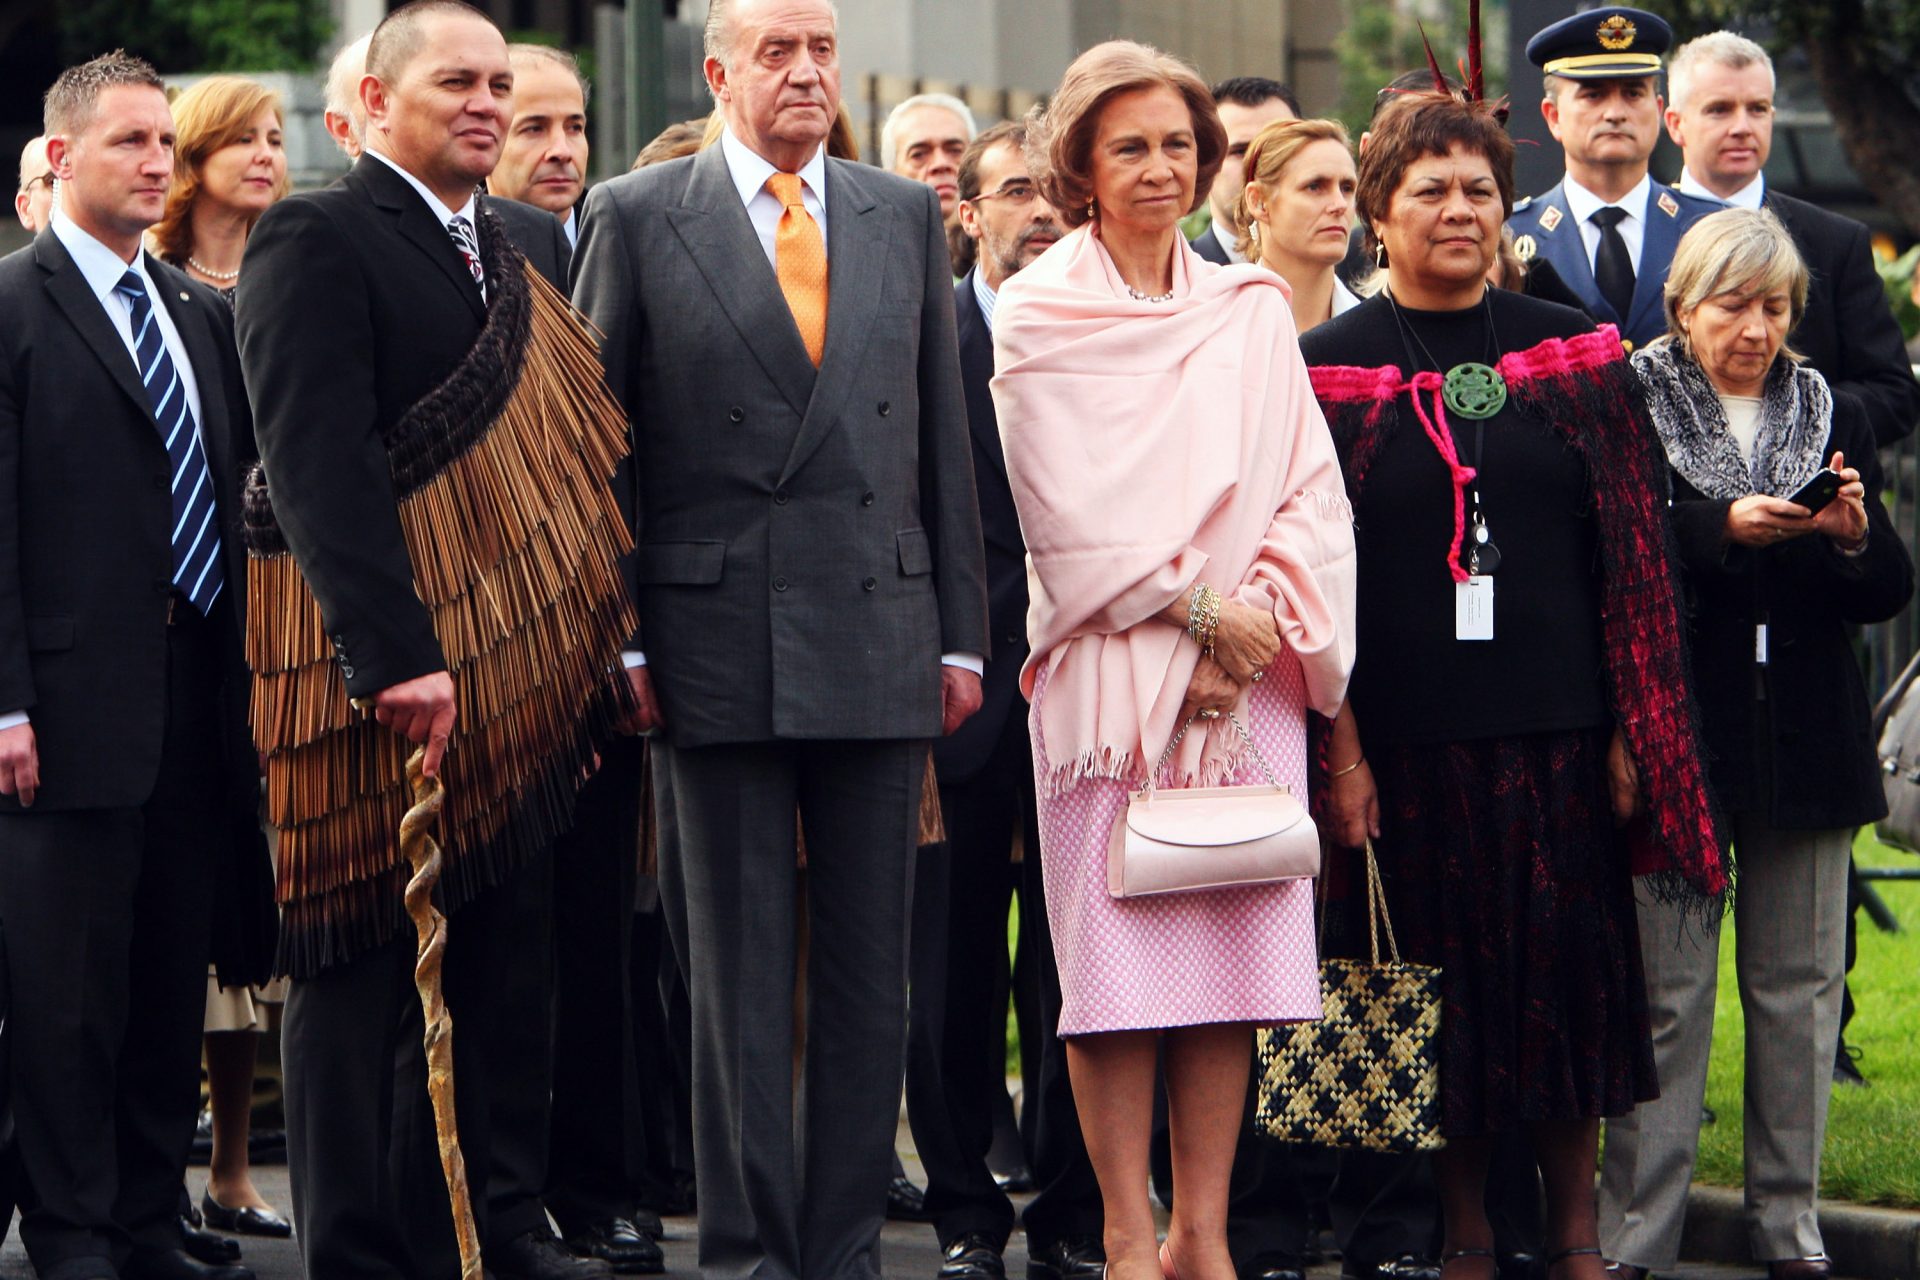 <p>And there were visitors from other countries, too. When they were still king and queen of Spain, Juan Carlos and Sofía made a royal tour of New Zealand and Australia. Maori warriors performed at their official welcome in Wellington.</p>